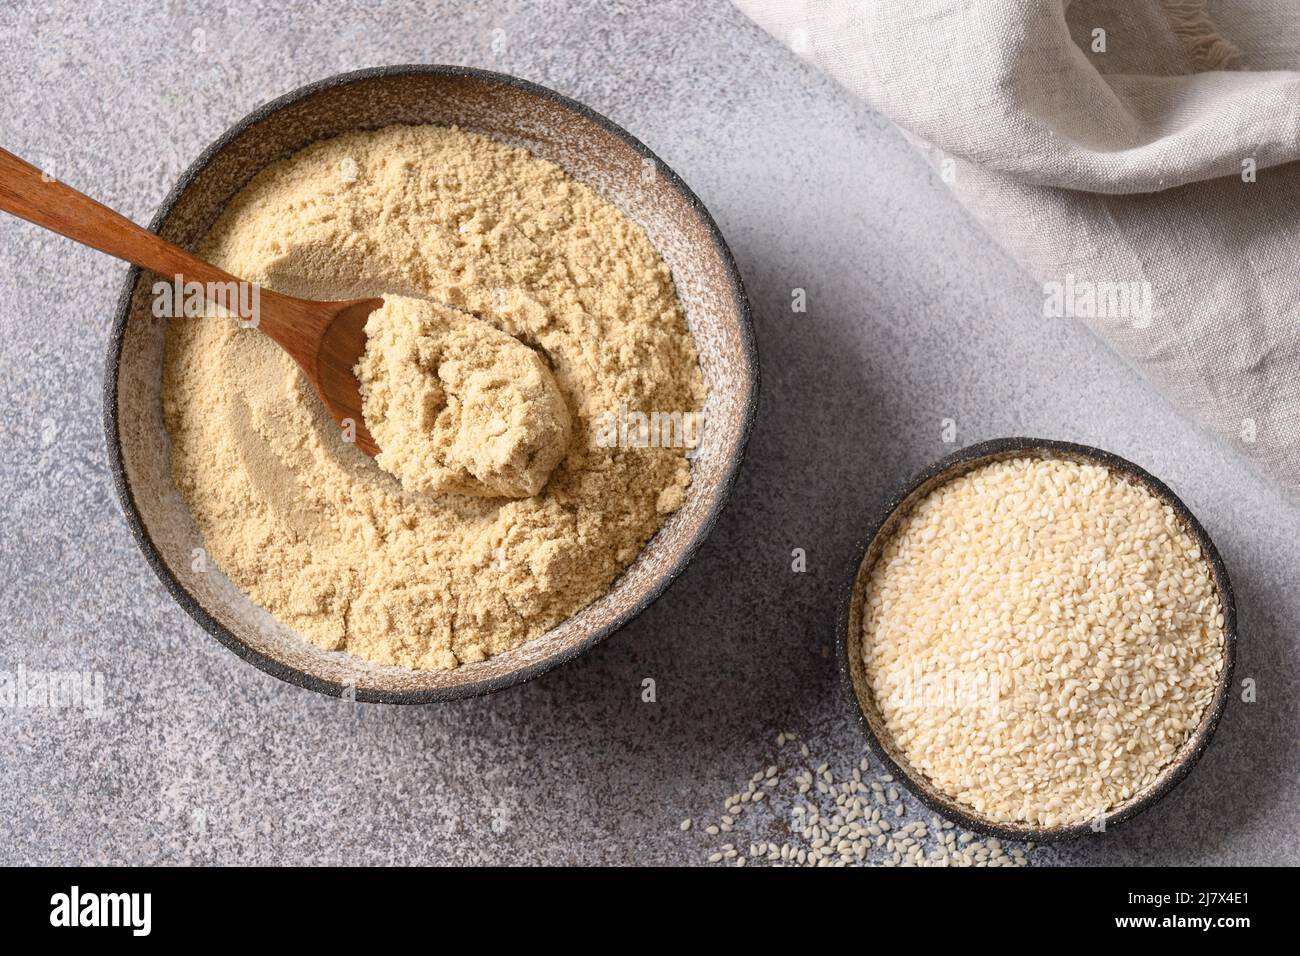 Sesame flour in bowl and white sesame seeds on gray background for cooking gluten-free and low carbohydrate dessert. Sesame flour includes ample miner Stock Photo